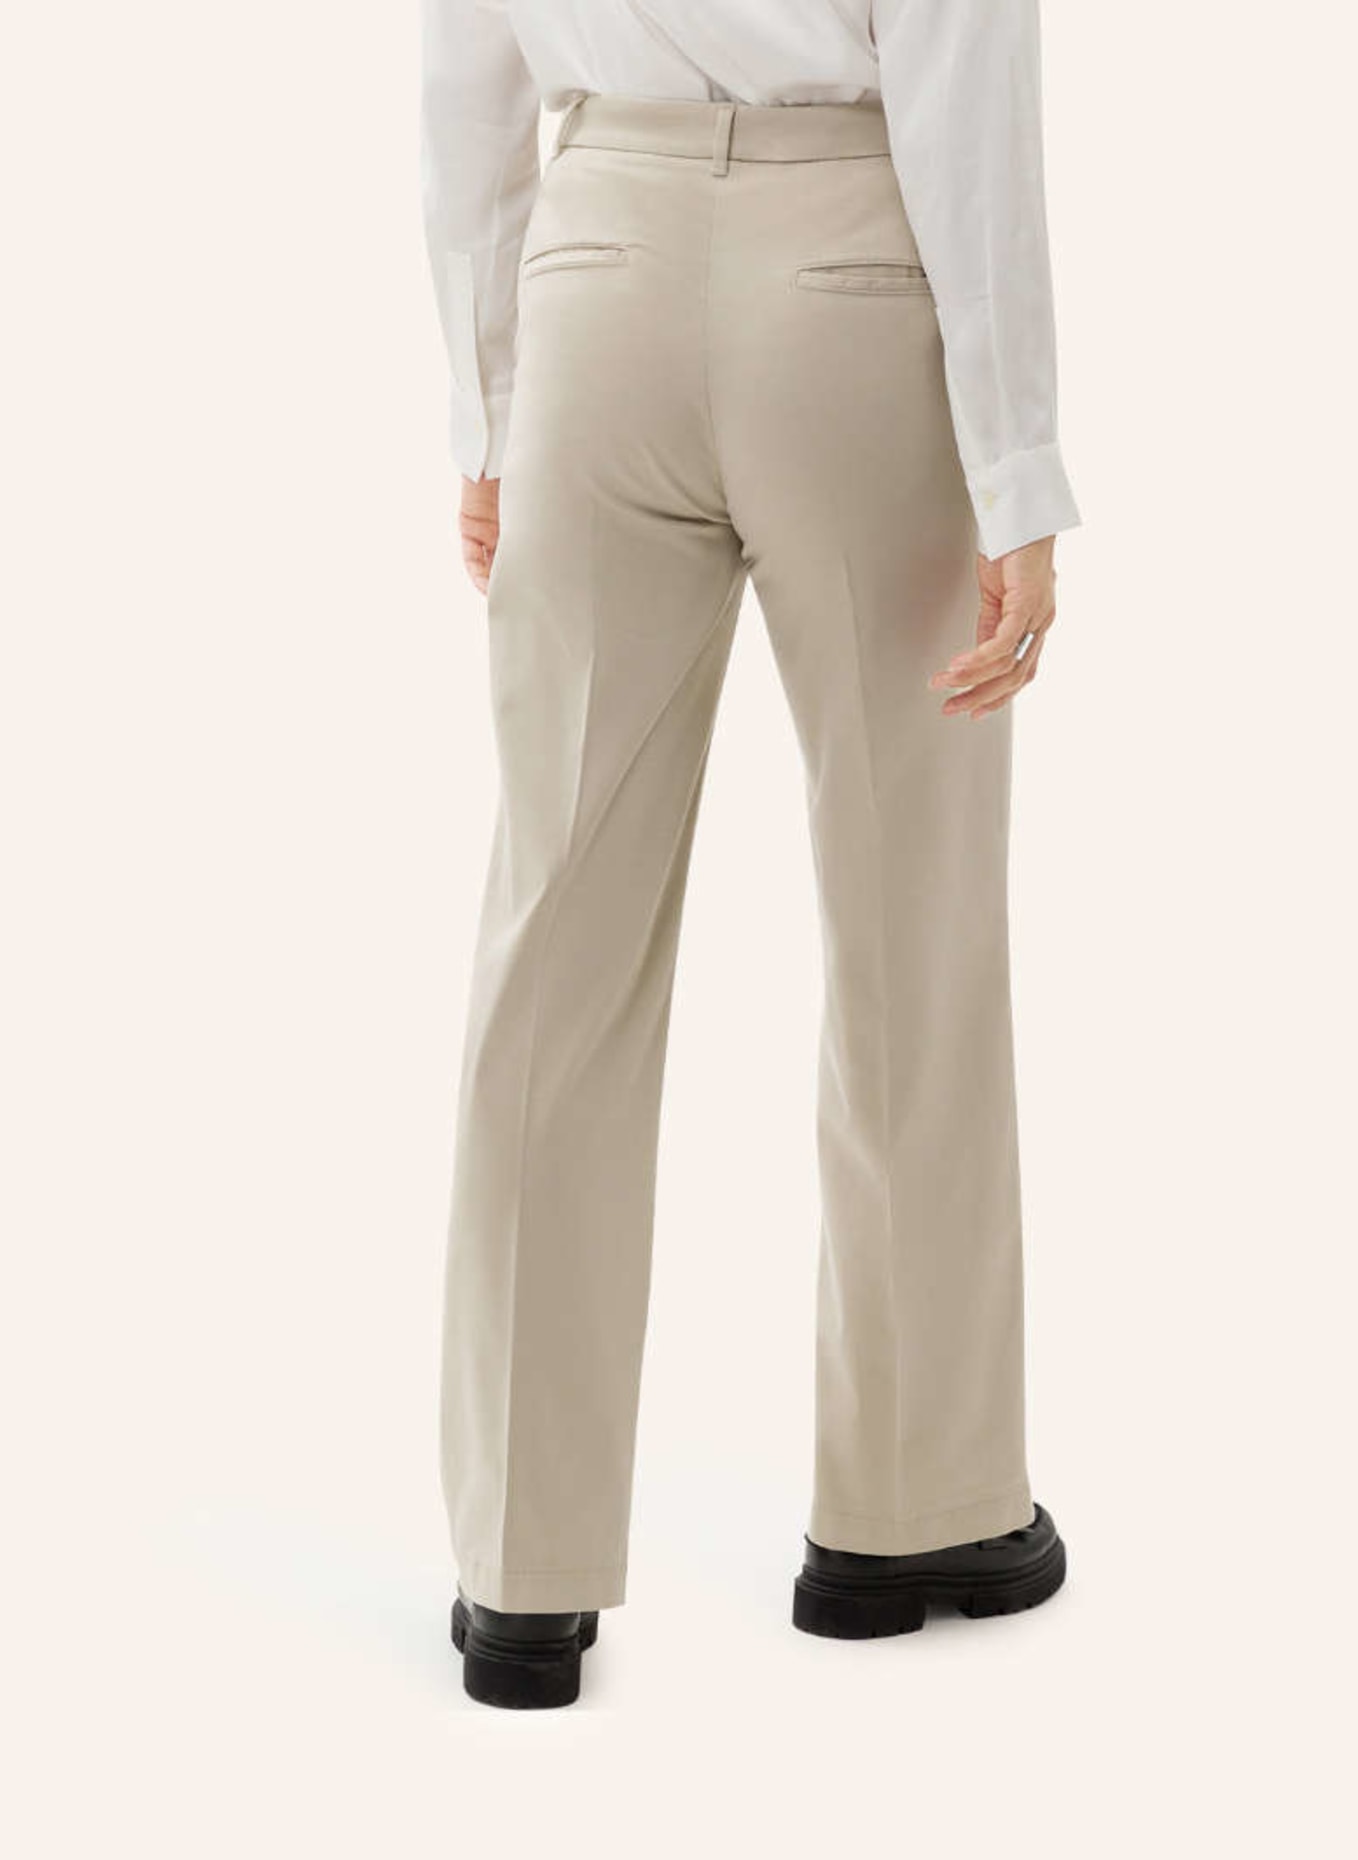 STYLE Palazzohose in beige BRAX MAINE